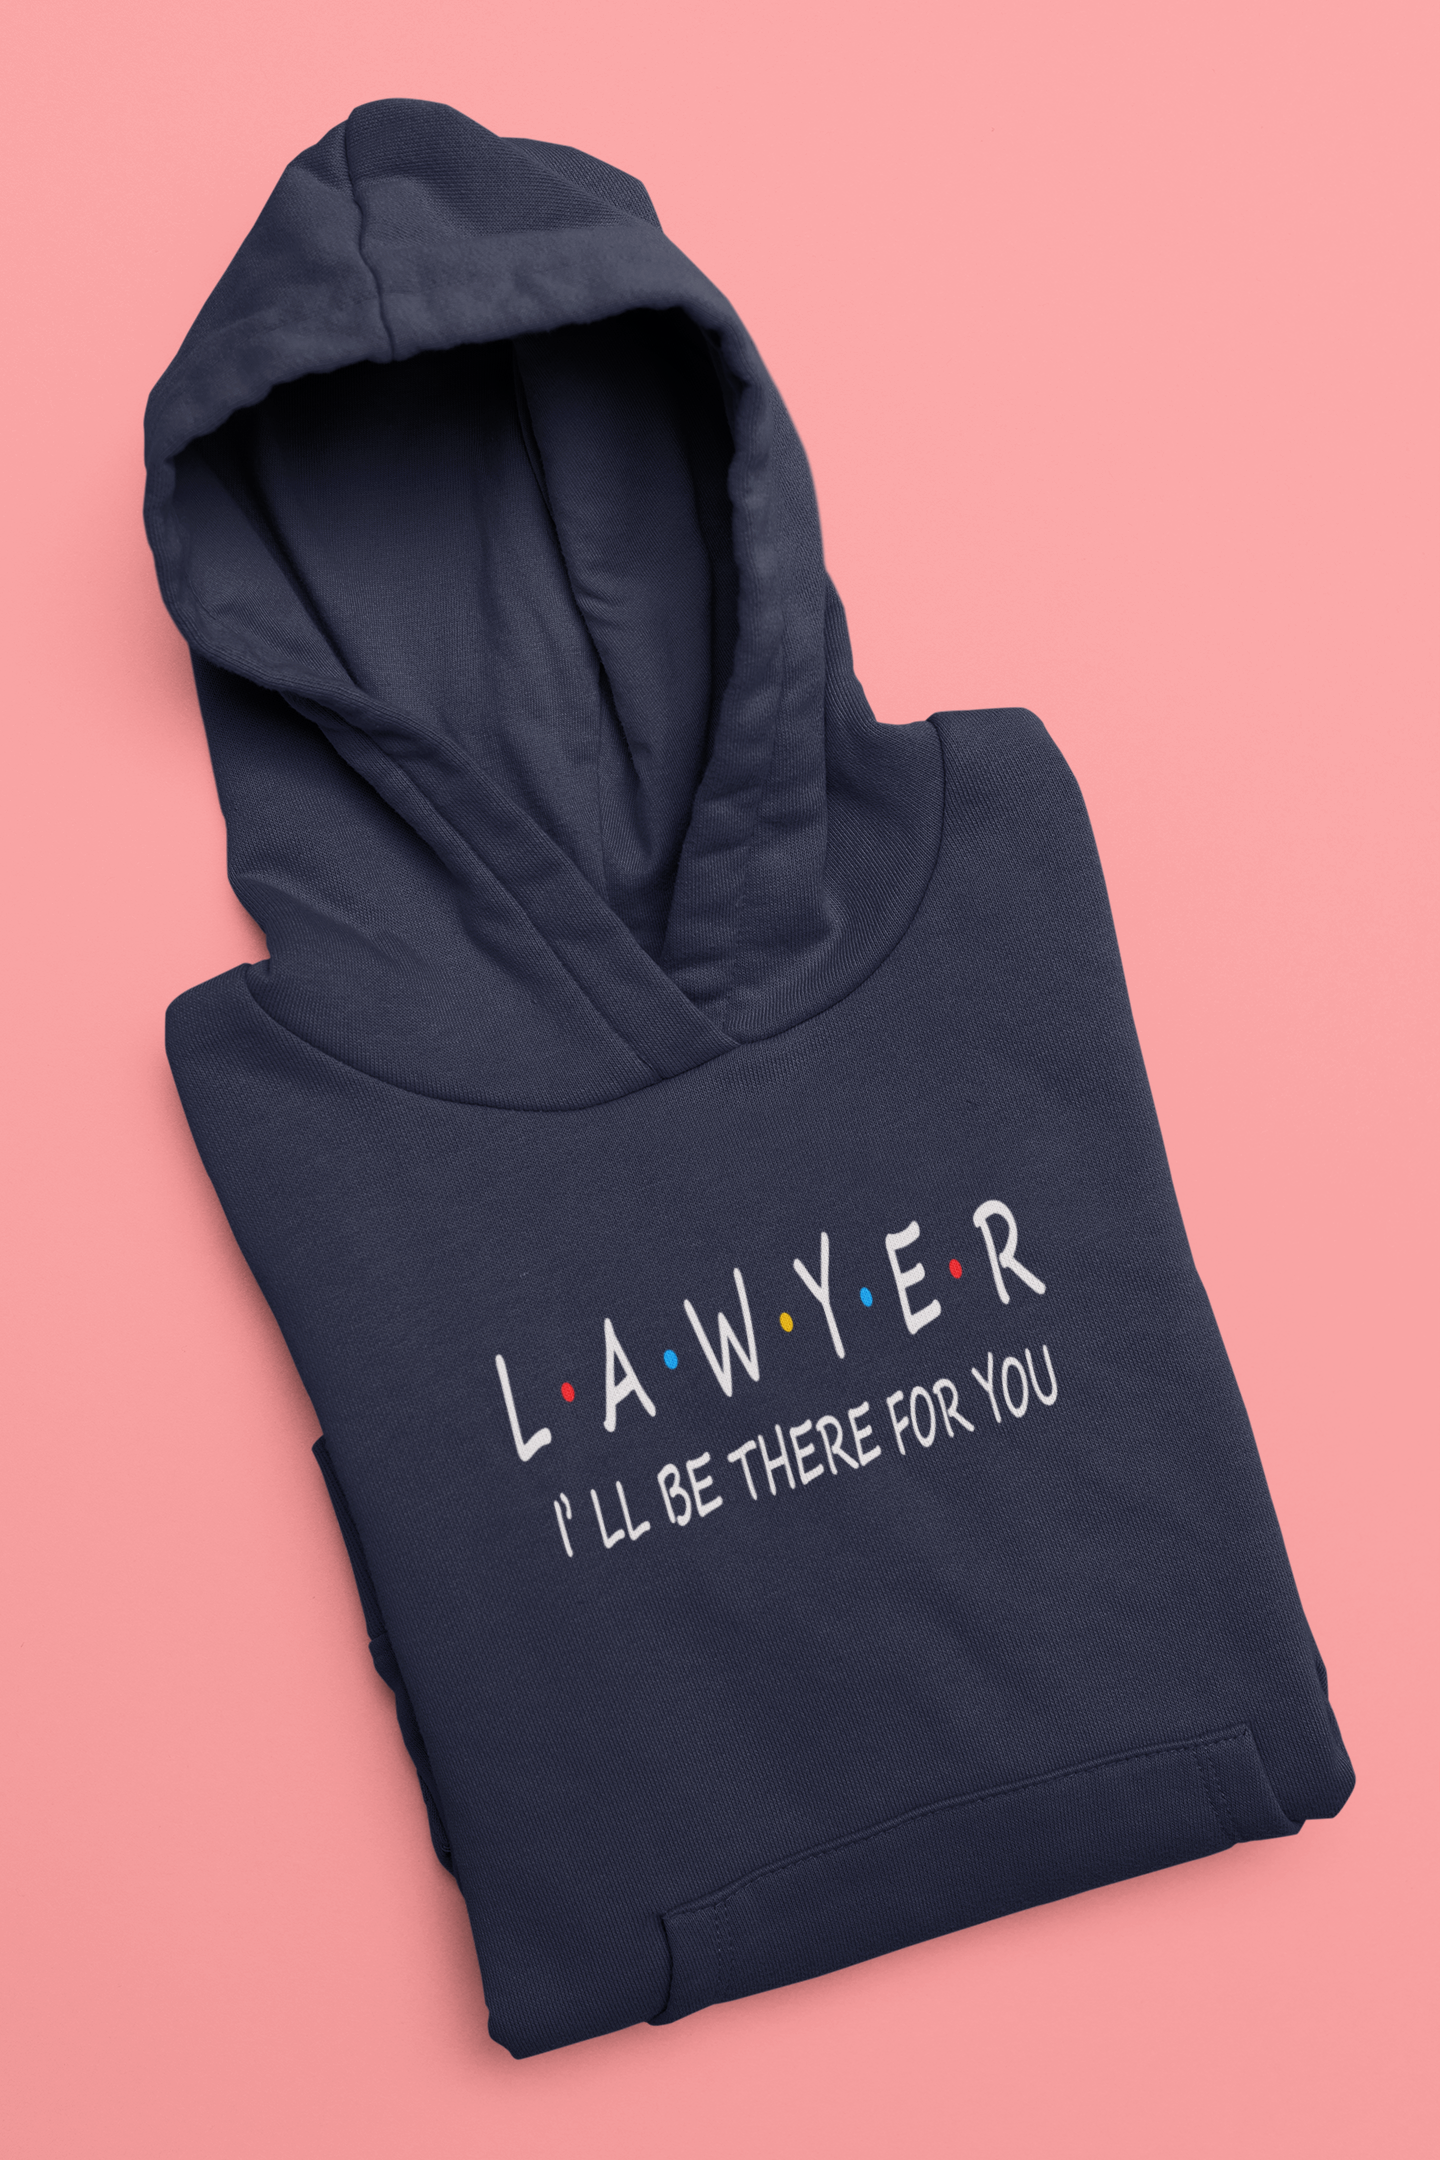 Lawyer I Will Be Their For You Hoodies for Women-FunkyTeesClub